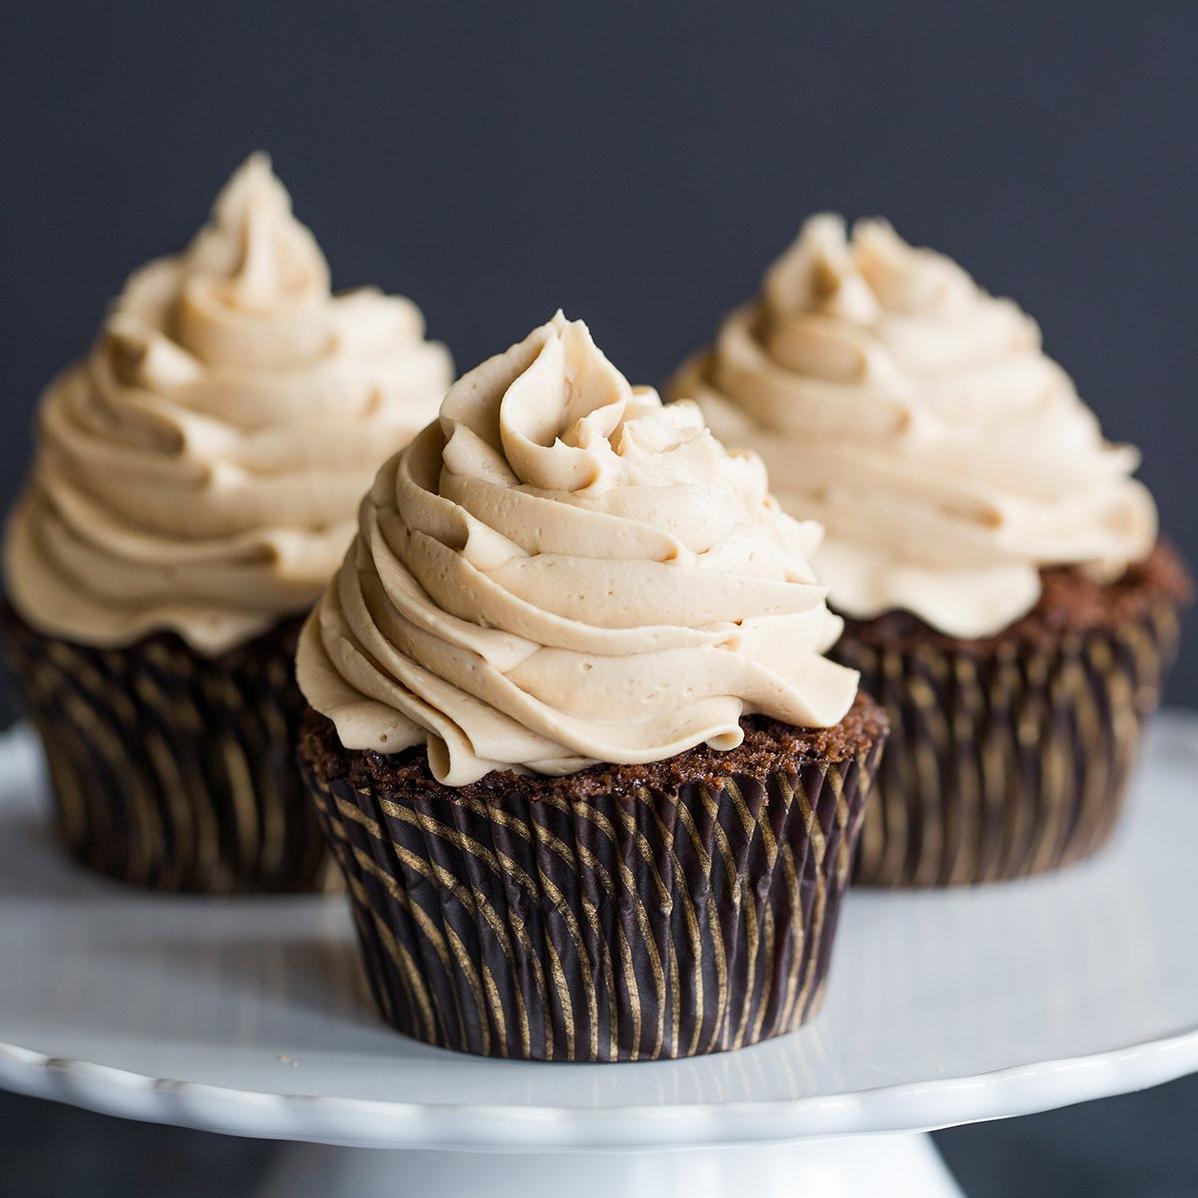  Bring some sophistication to your coffee game with this Mocha pour-on icing recipe.